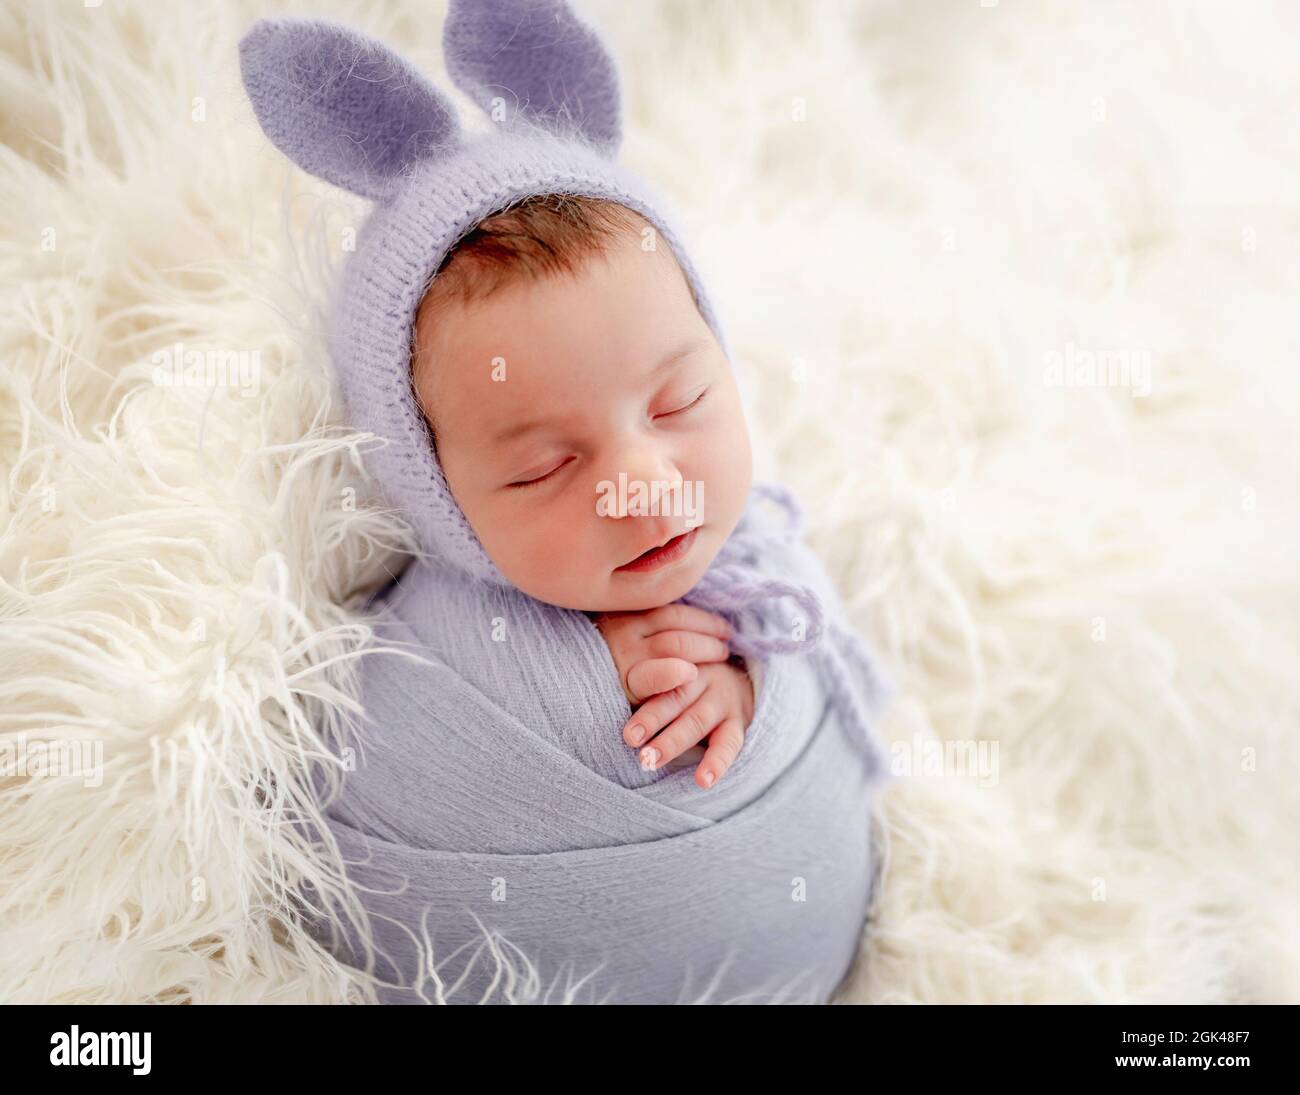 Little beautiful newborn baby girl swaadled in fabric and wearing hat with bunny ears sleeping on fur during studio photoshoot. Cute infant child kid Stock Photo